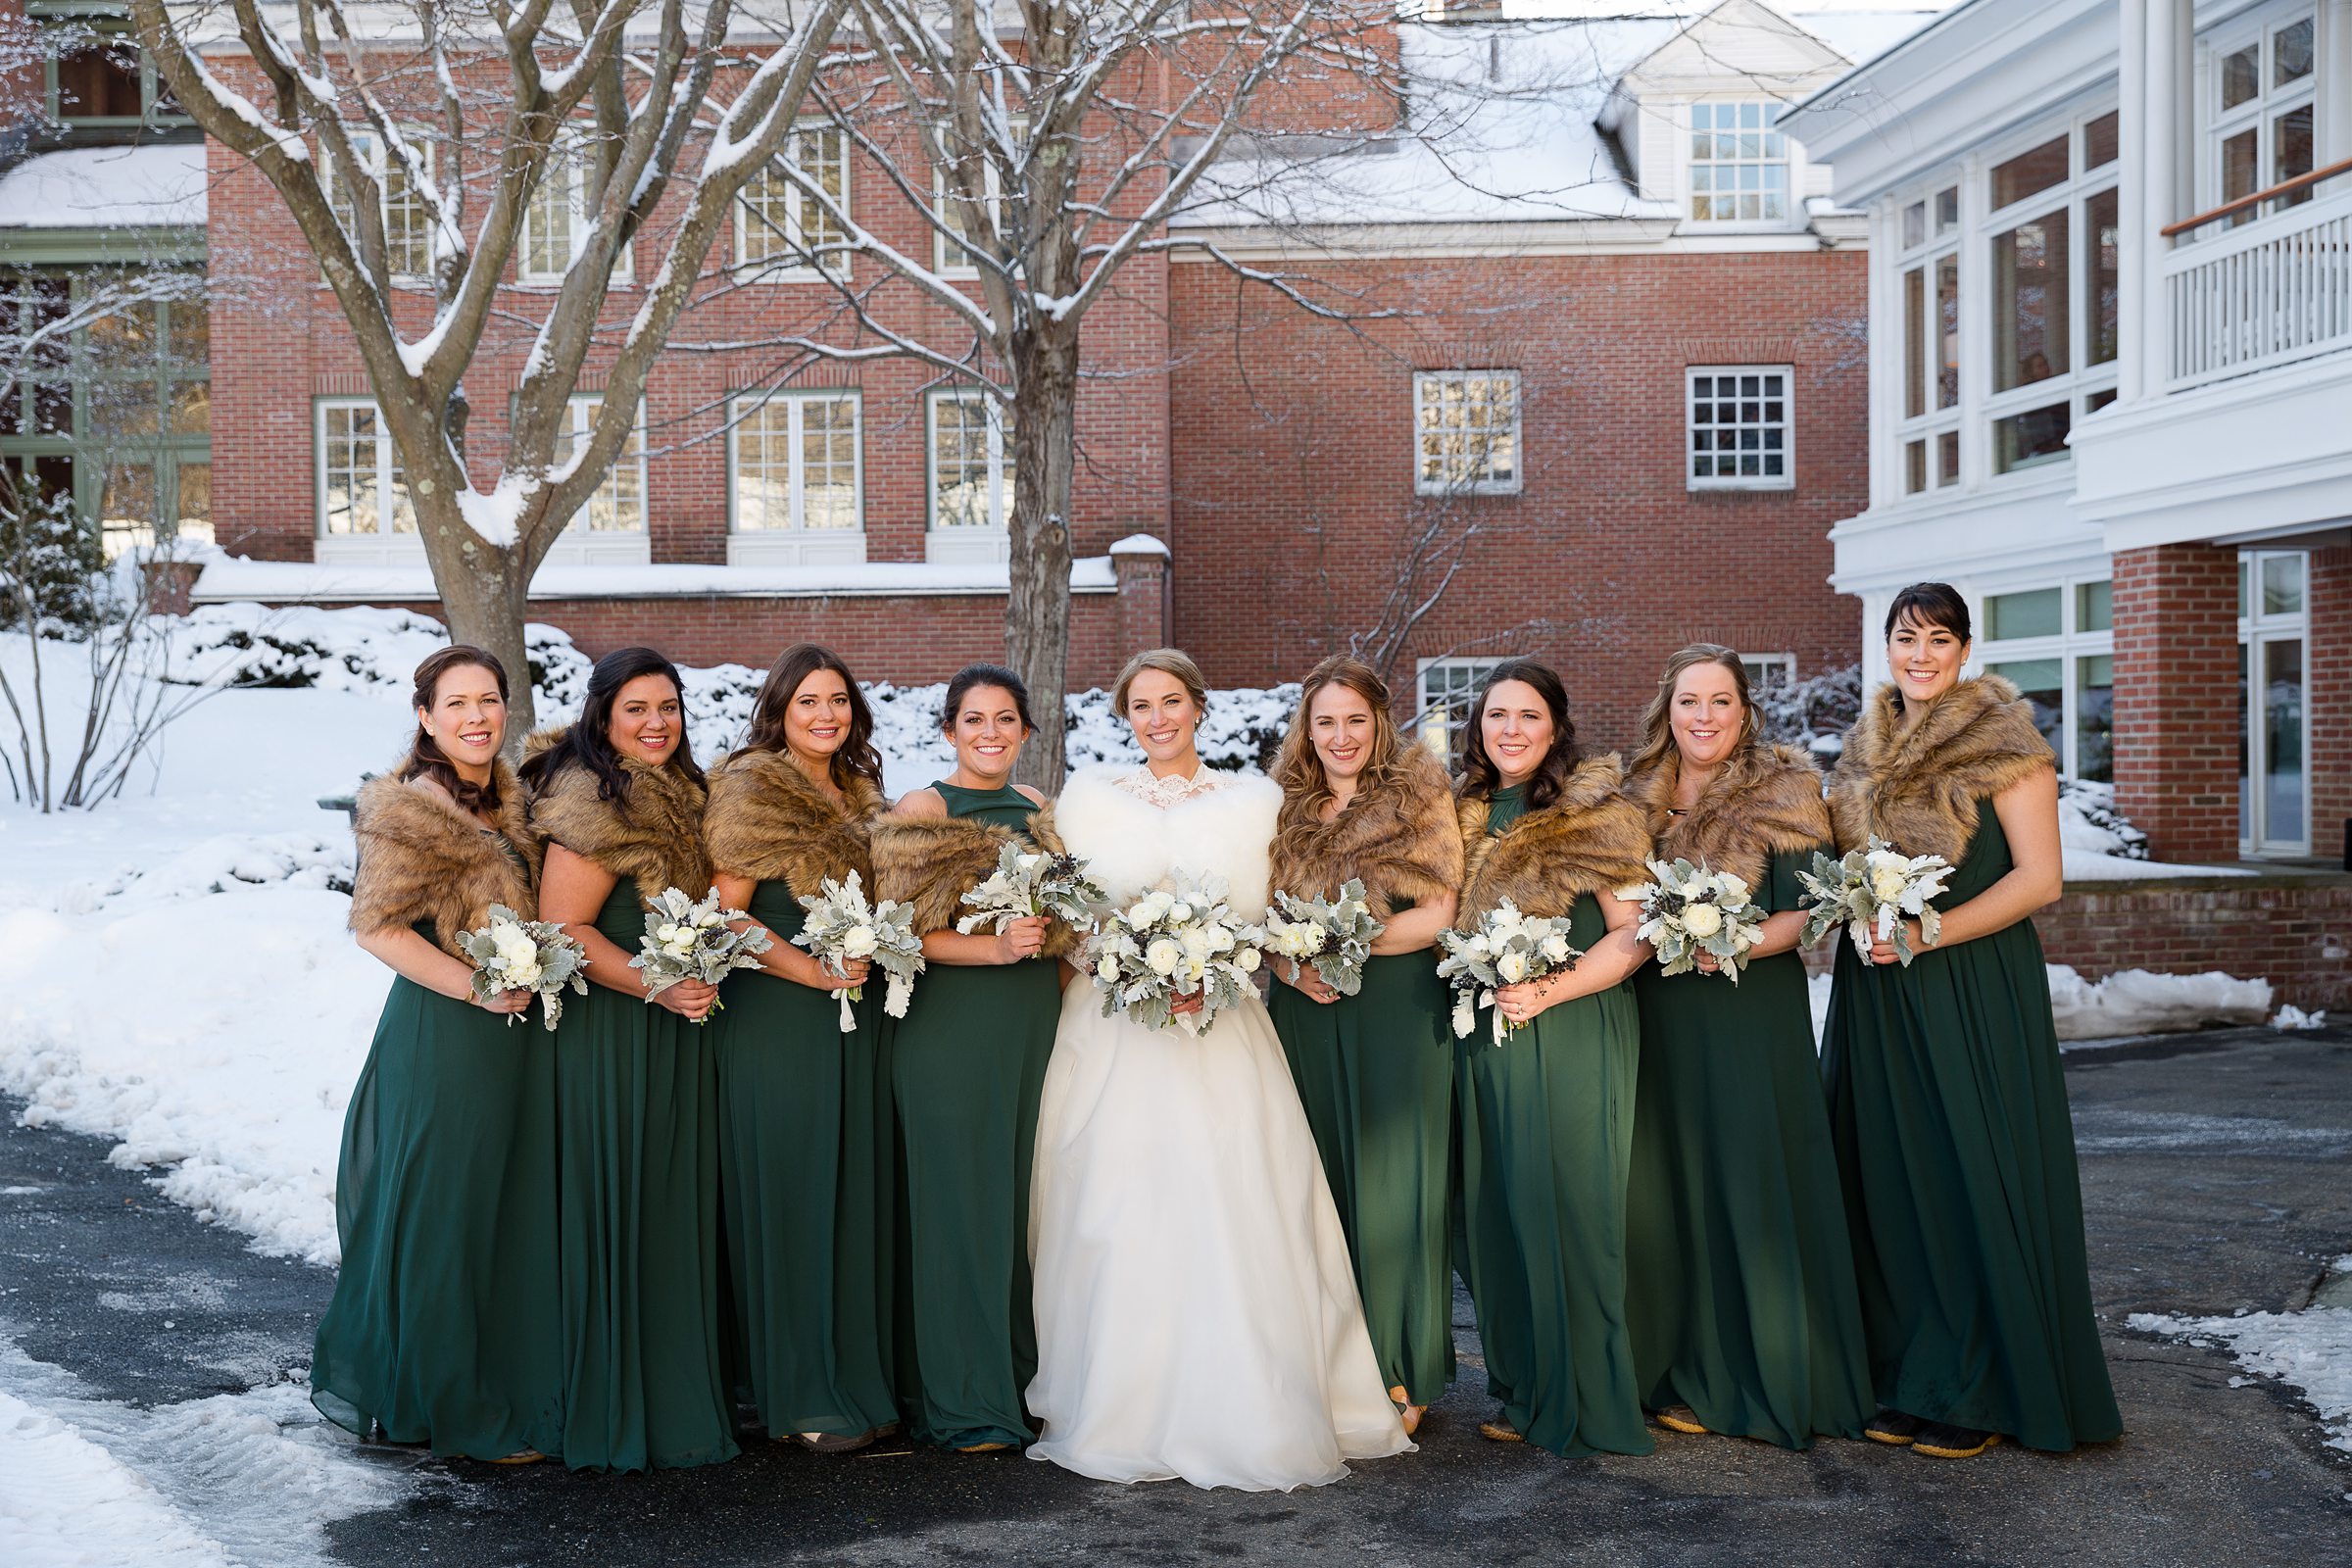 Winter bridesmaid photography in Woodstock, VT